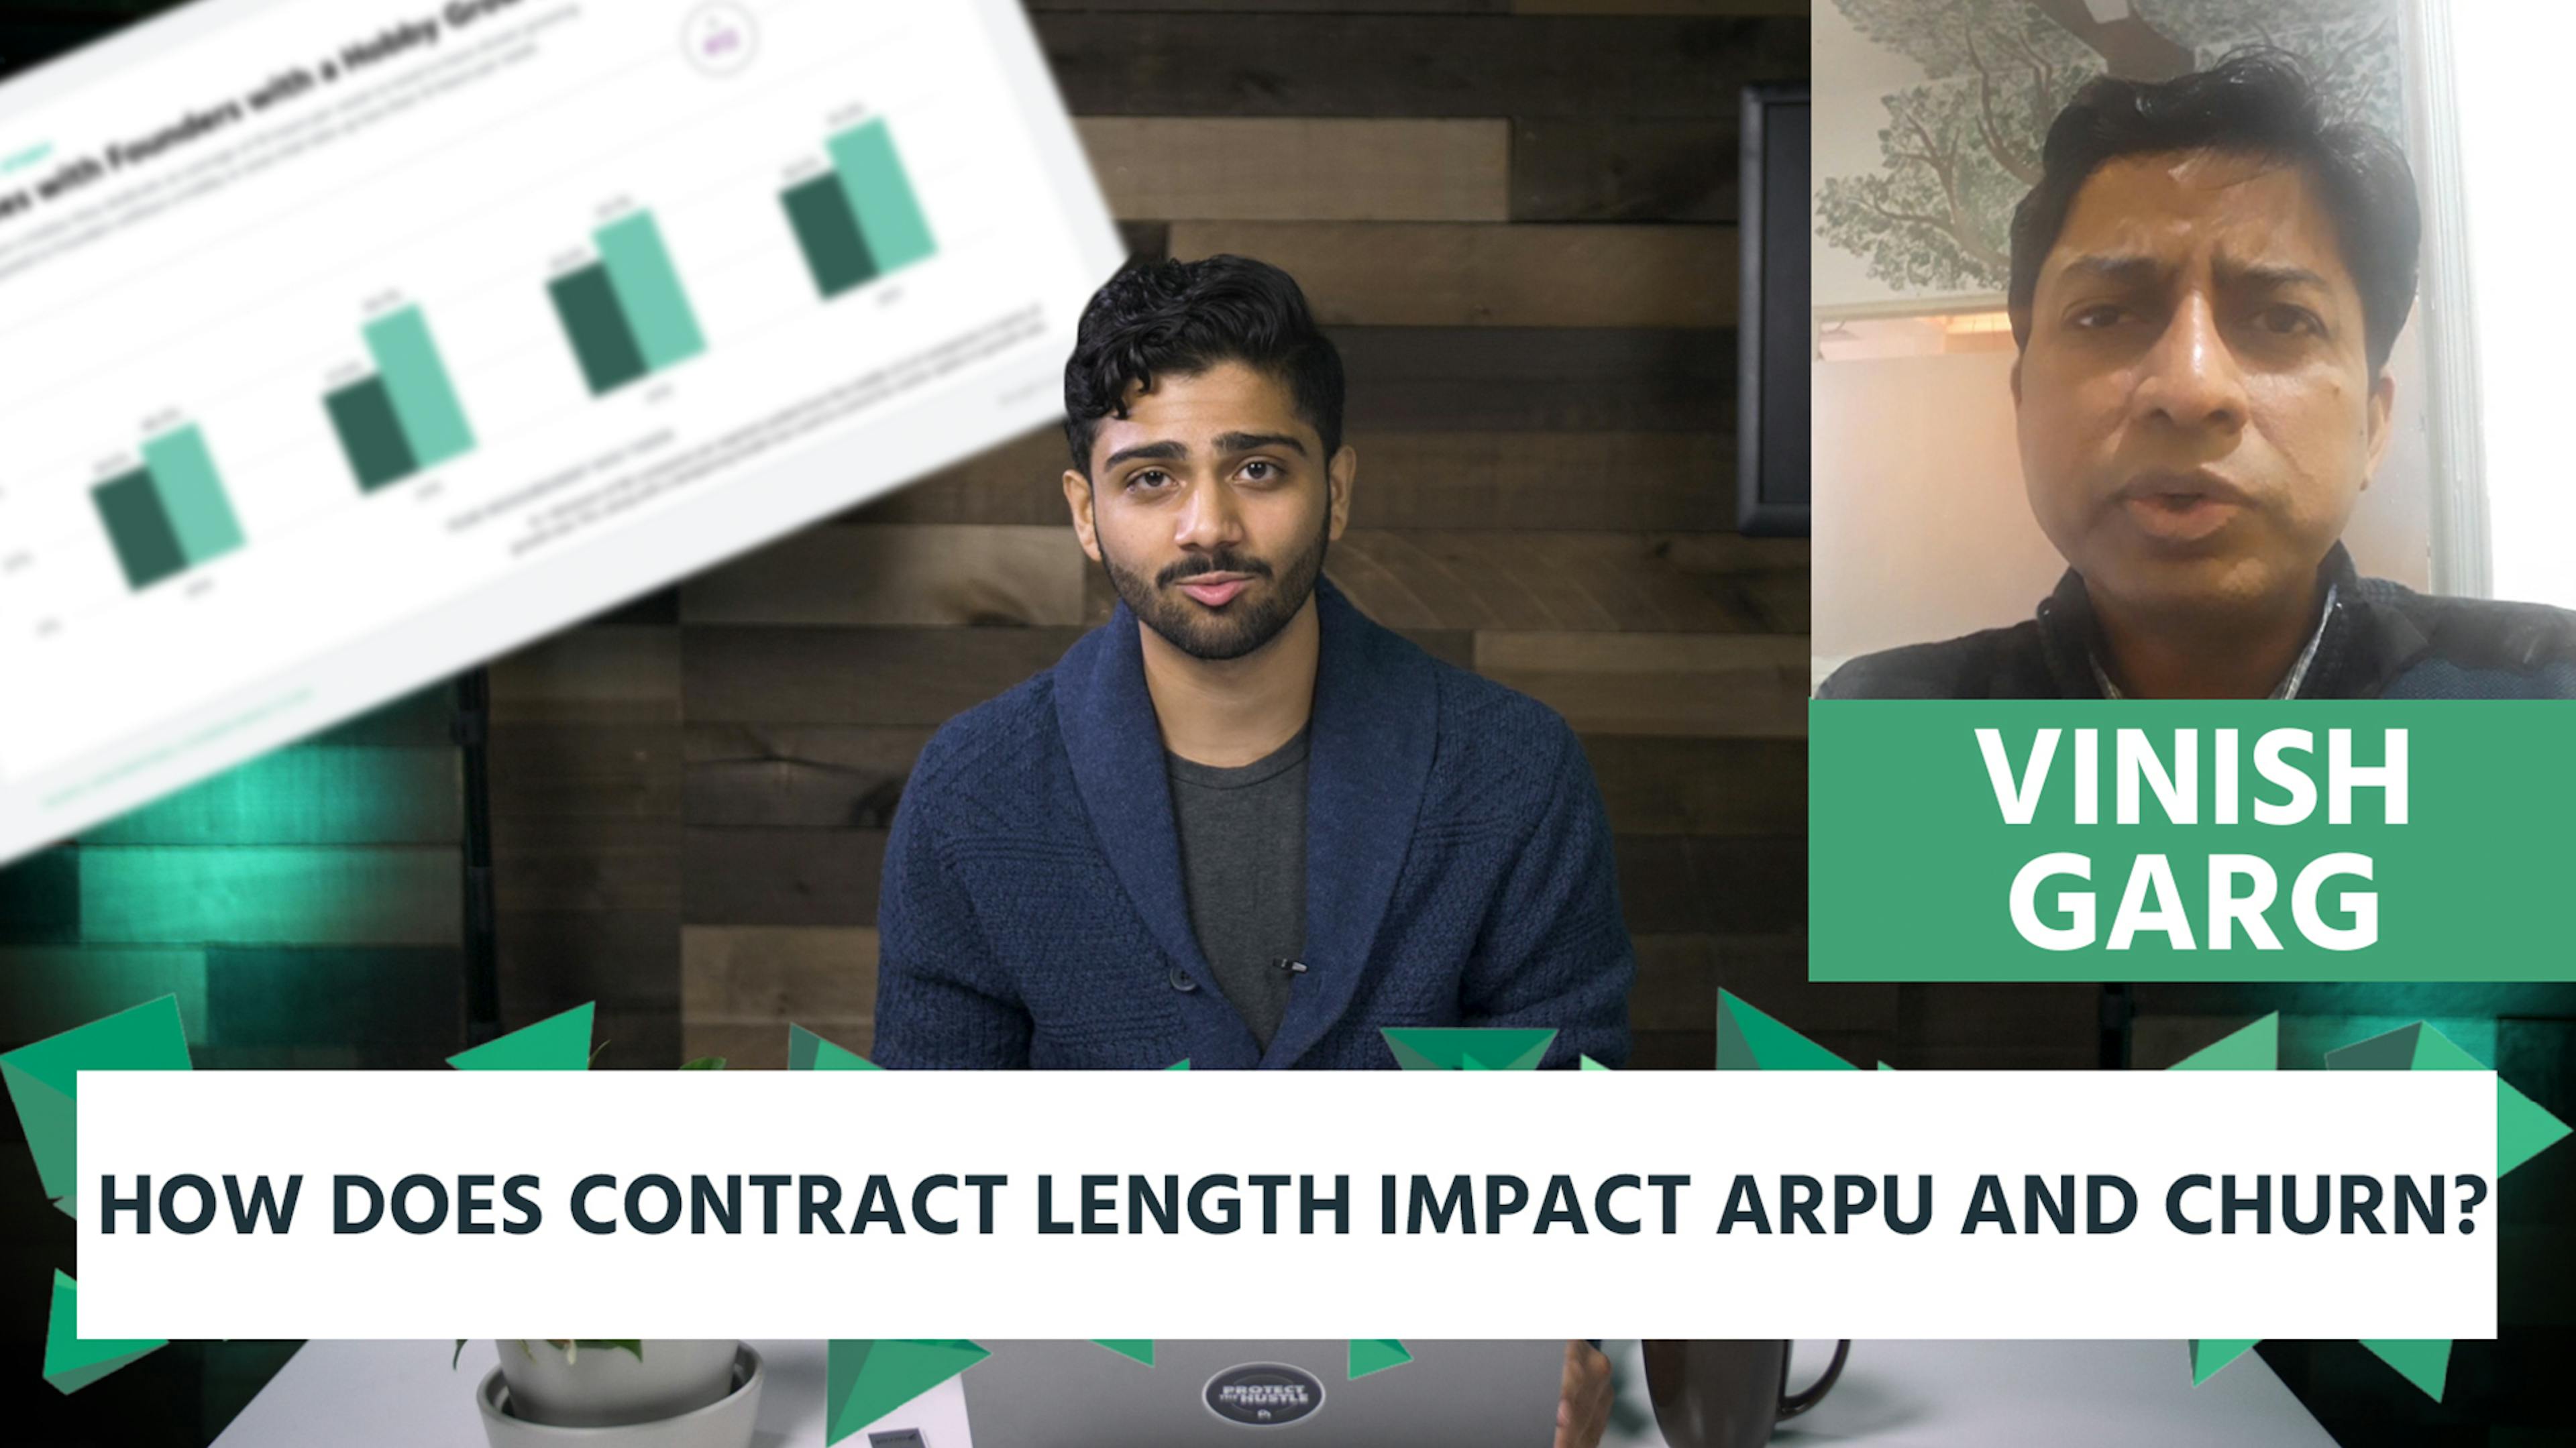 PWR Thumbnail - How does contract length impact ARPU and churn?